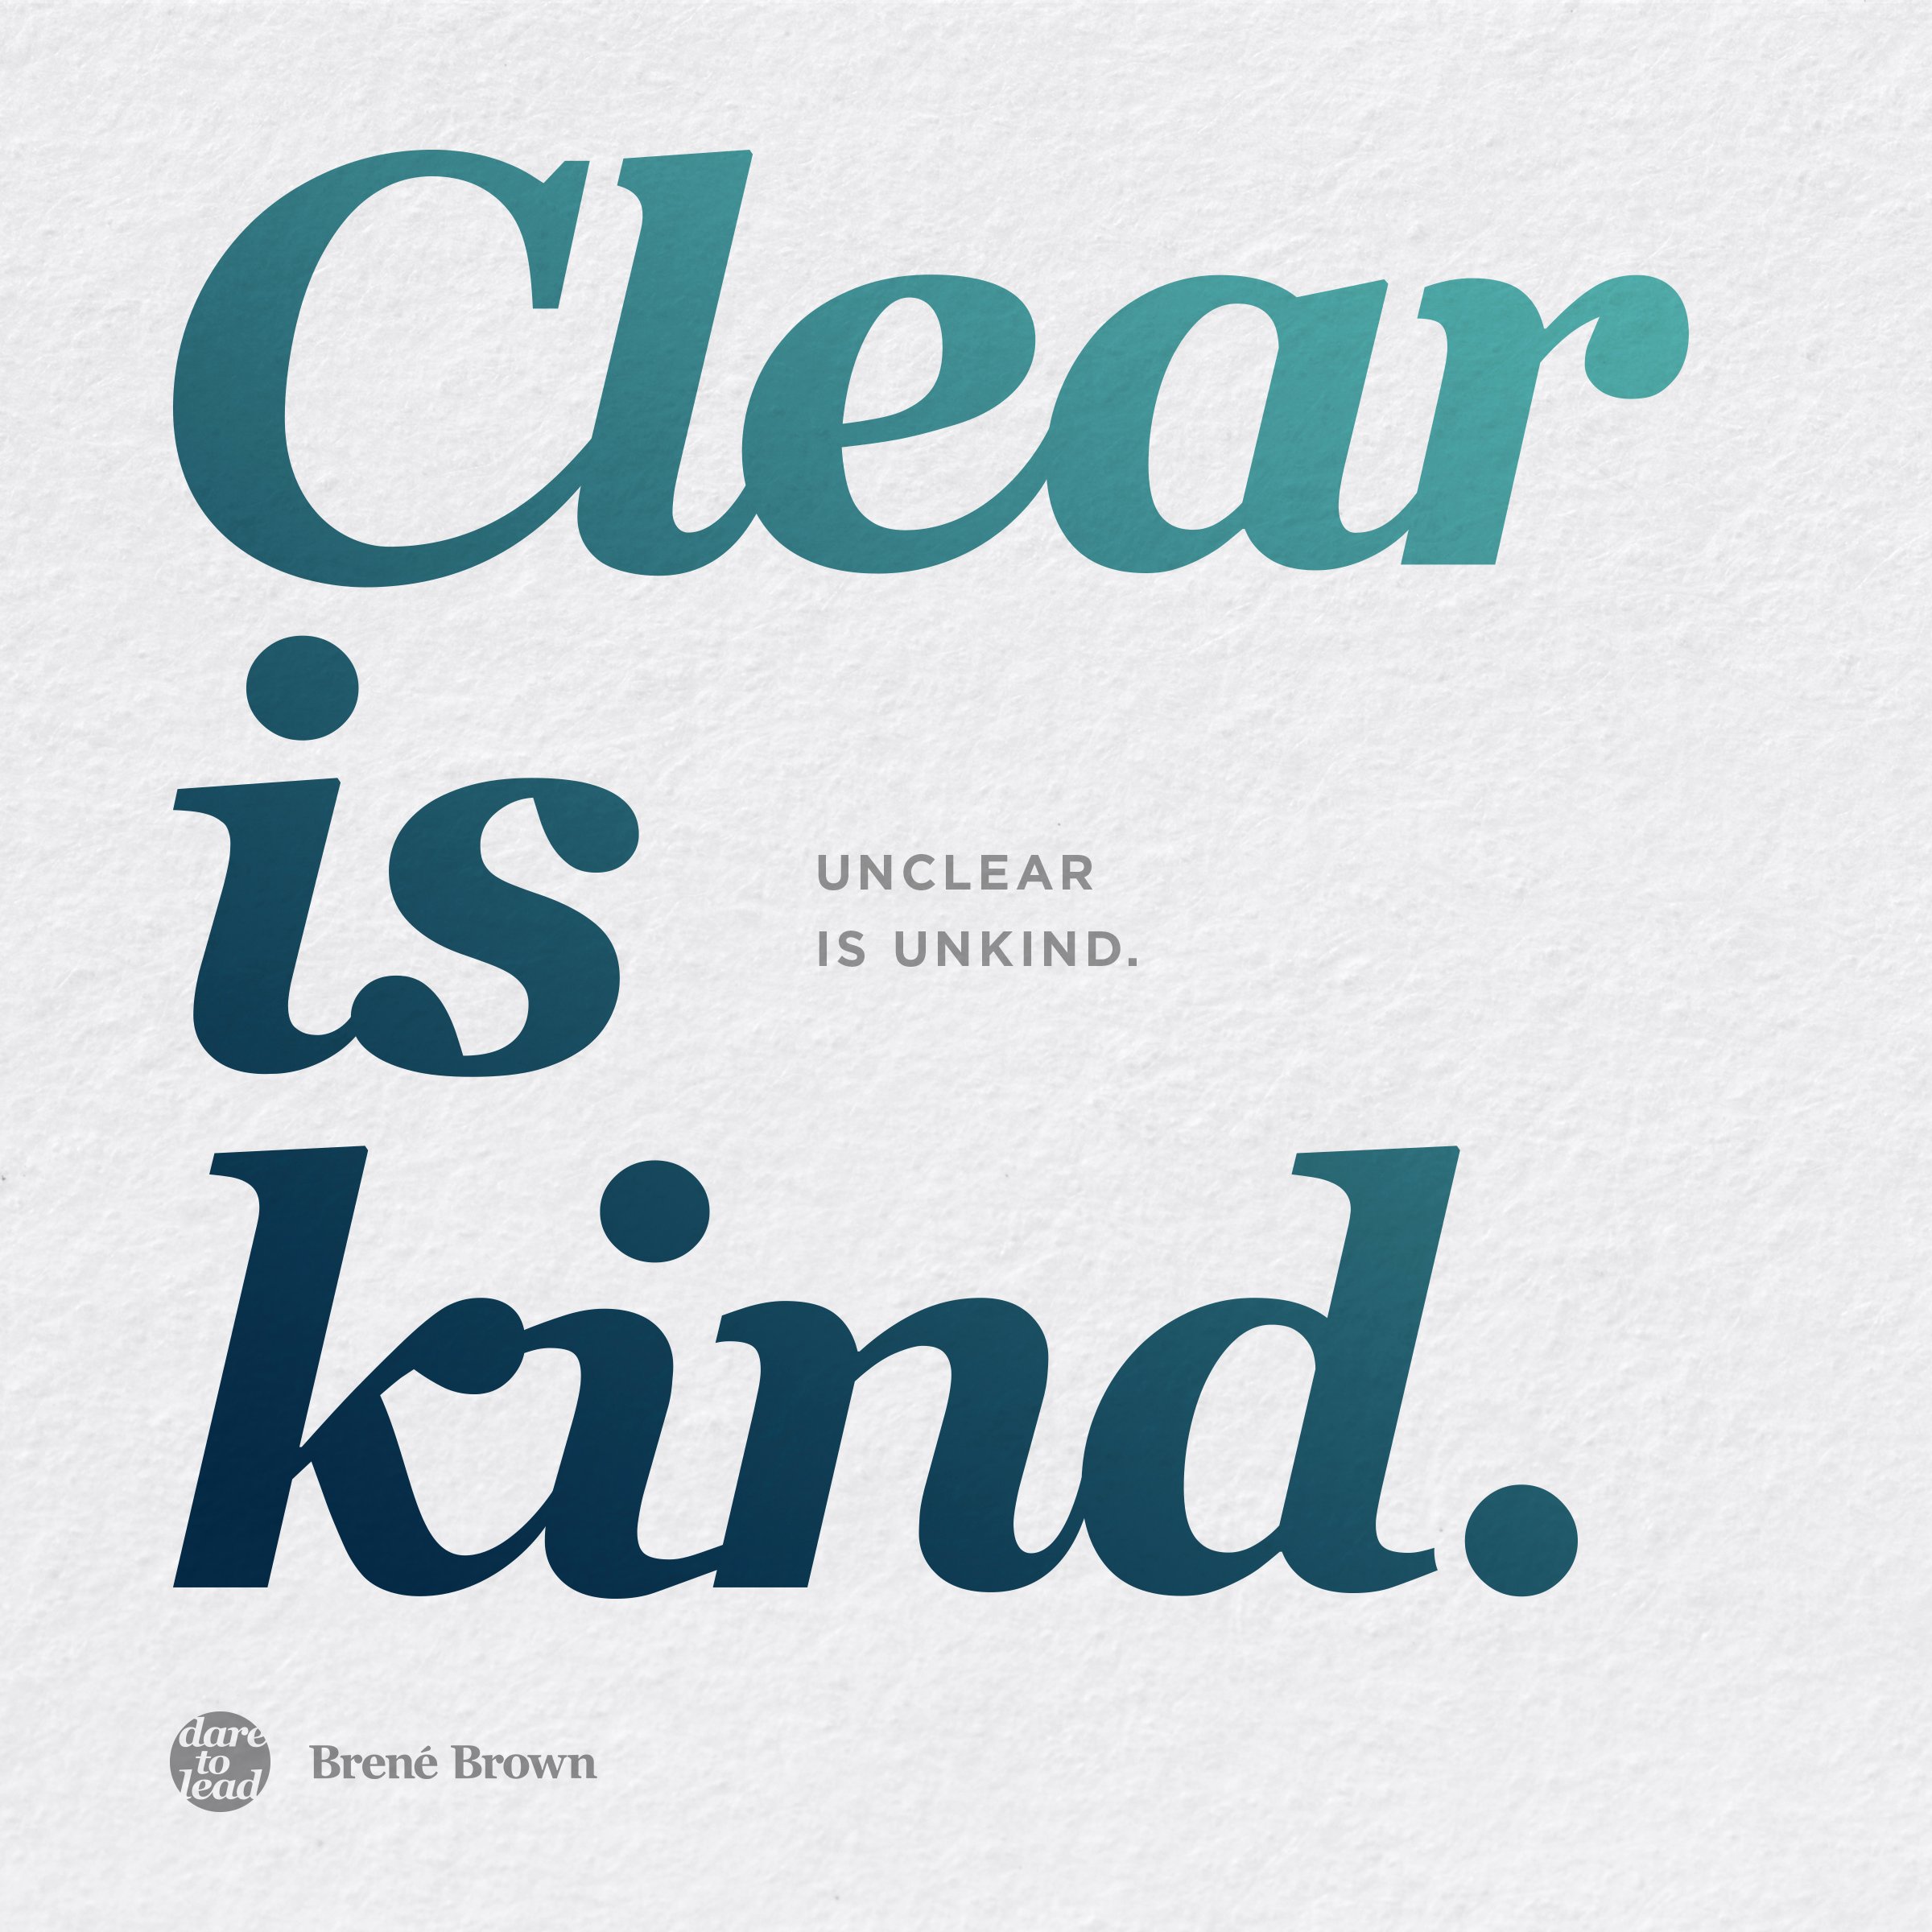 Quote: Clear is kind, unclear is unkind